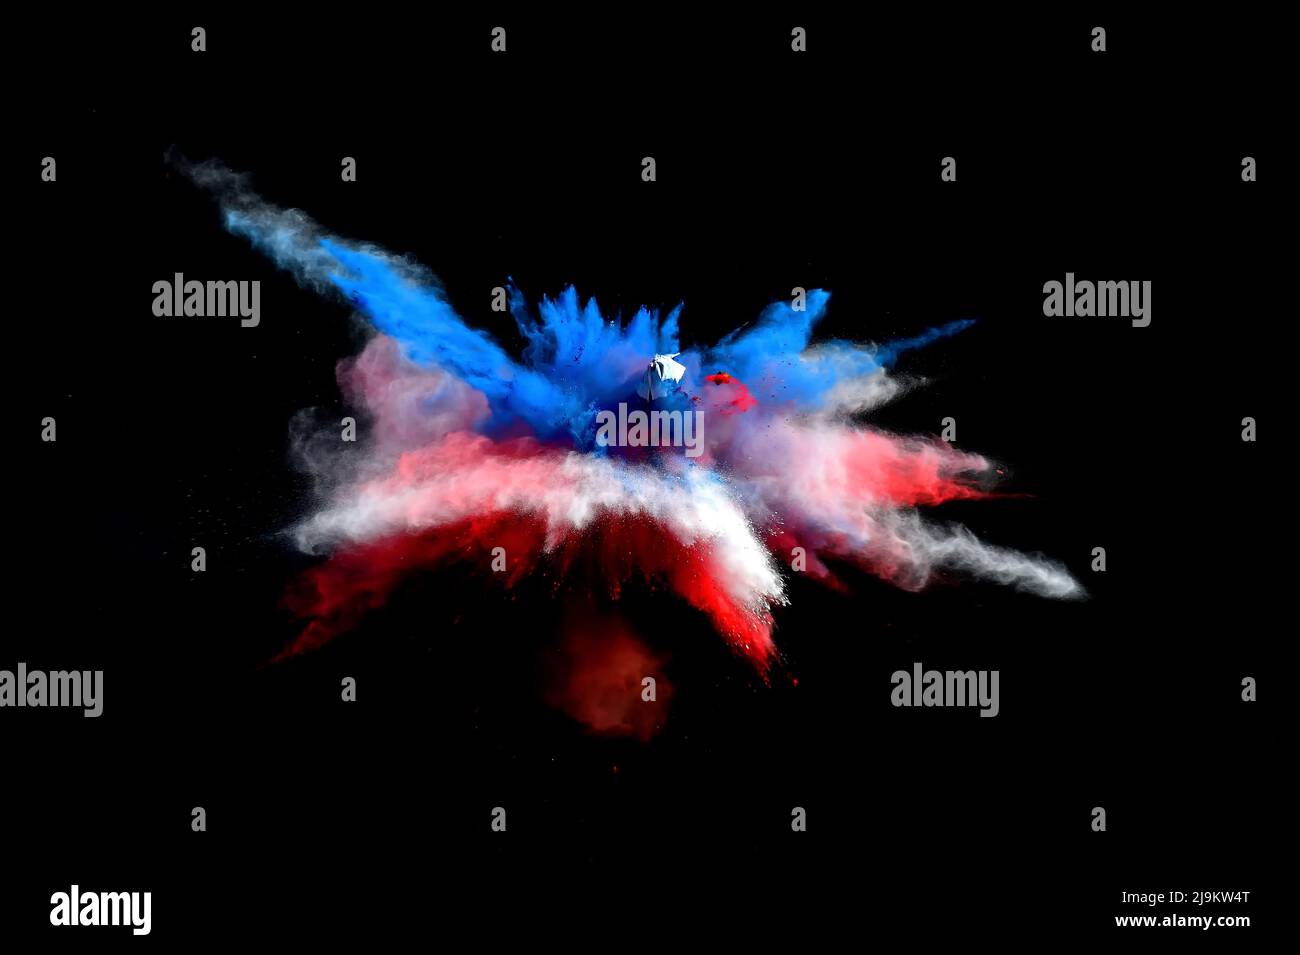 Red, white and blue forms of powder paint combined  together explode in front of a black background to give off fantastic powder paint explosions. Stock Photo